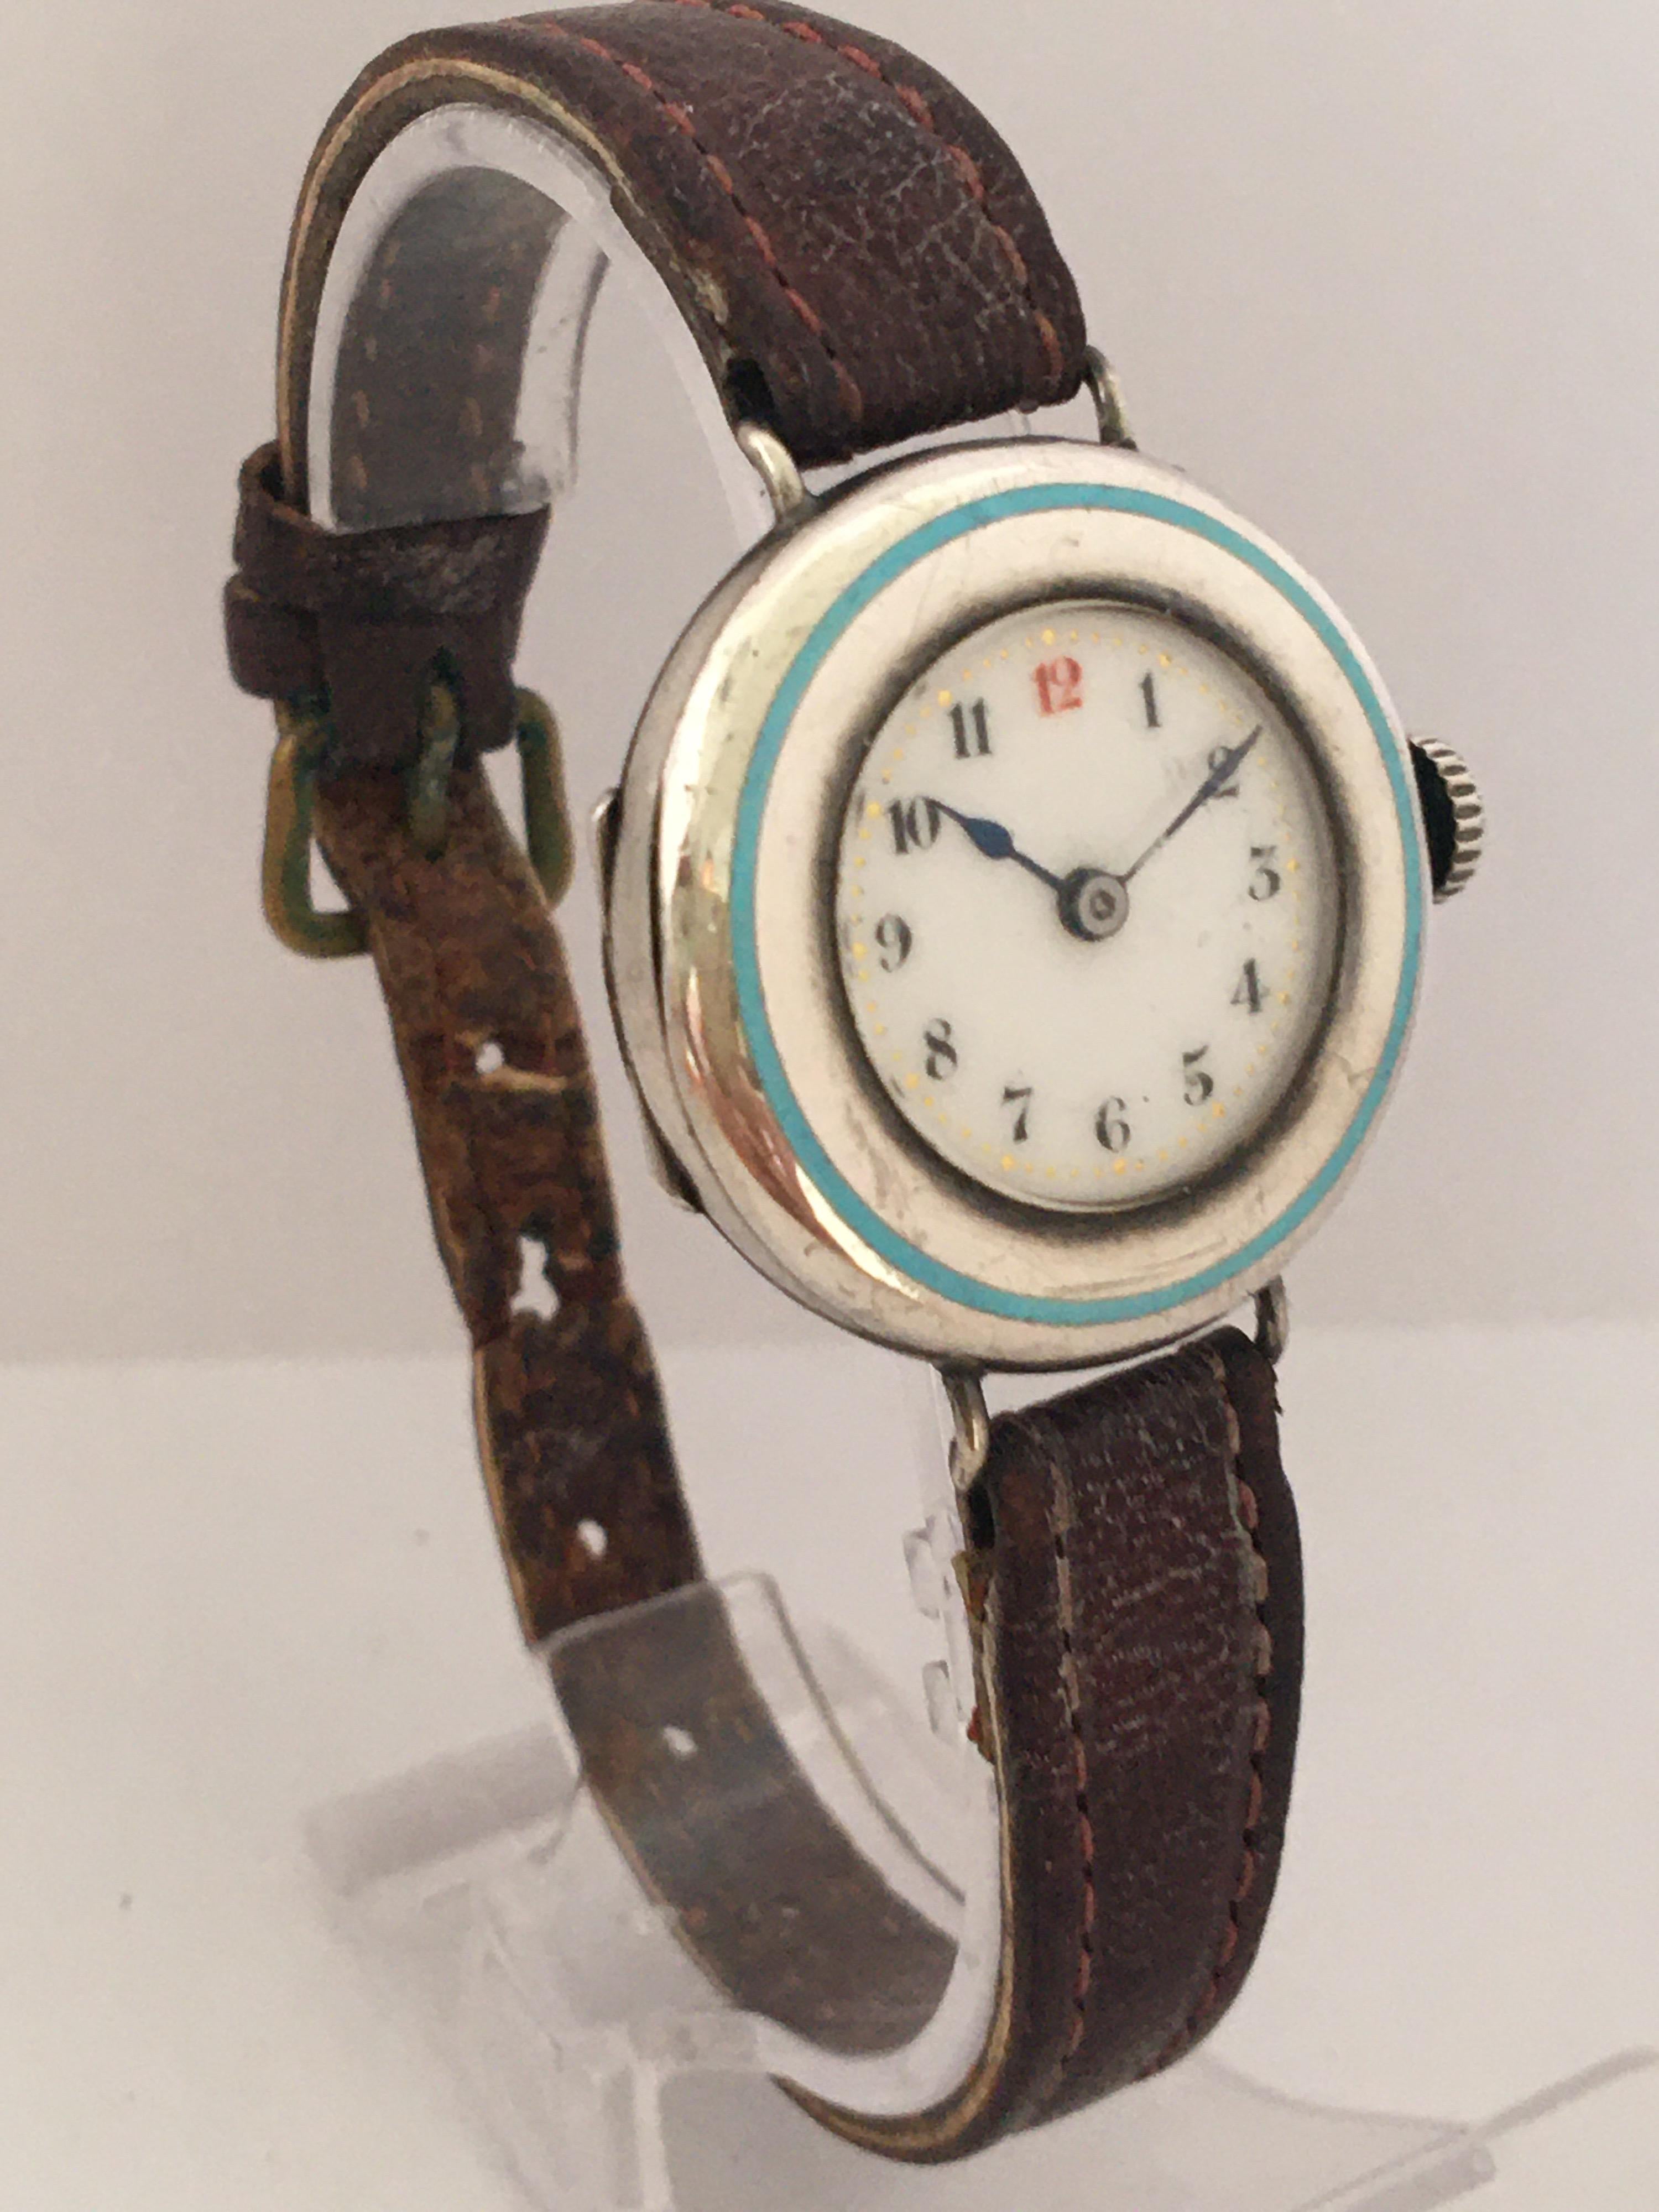 This beautiful pre-owned silver enamel manual winding  trench watch is working and is ticking well. Visible signs of used and ageing with minors scratches and tiny dents on the silver case and the strap is worn as shown.

Please study the images